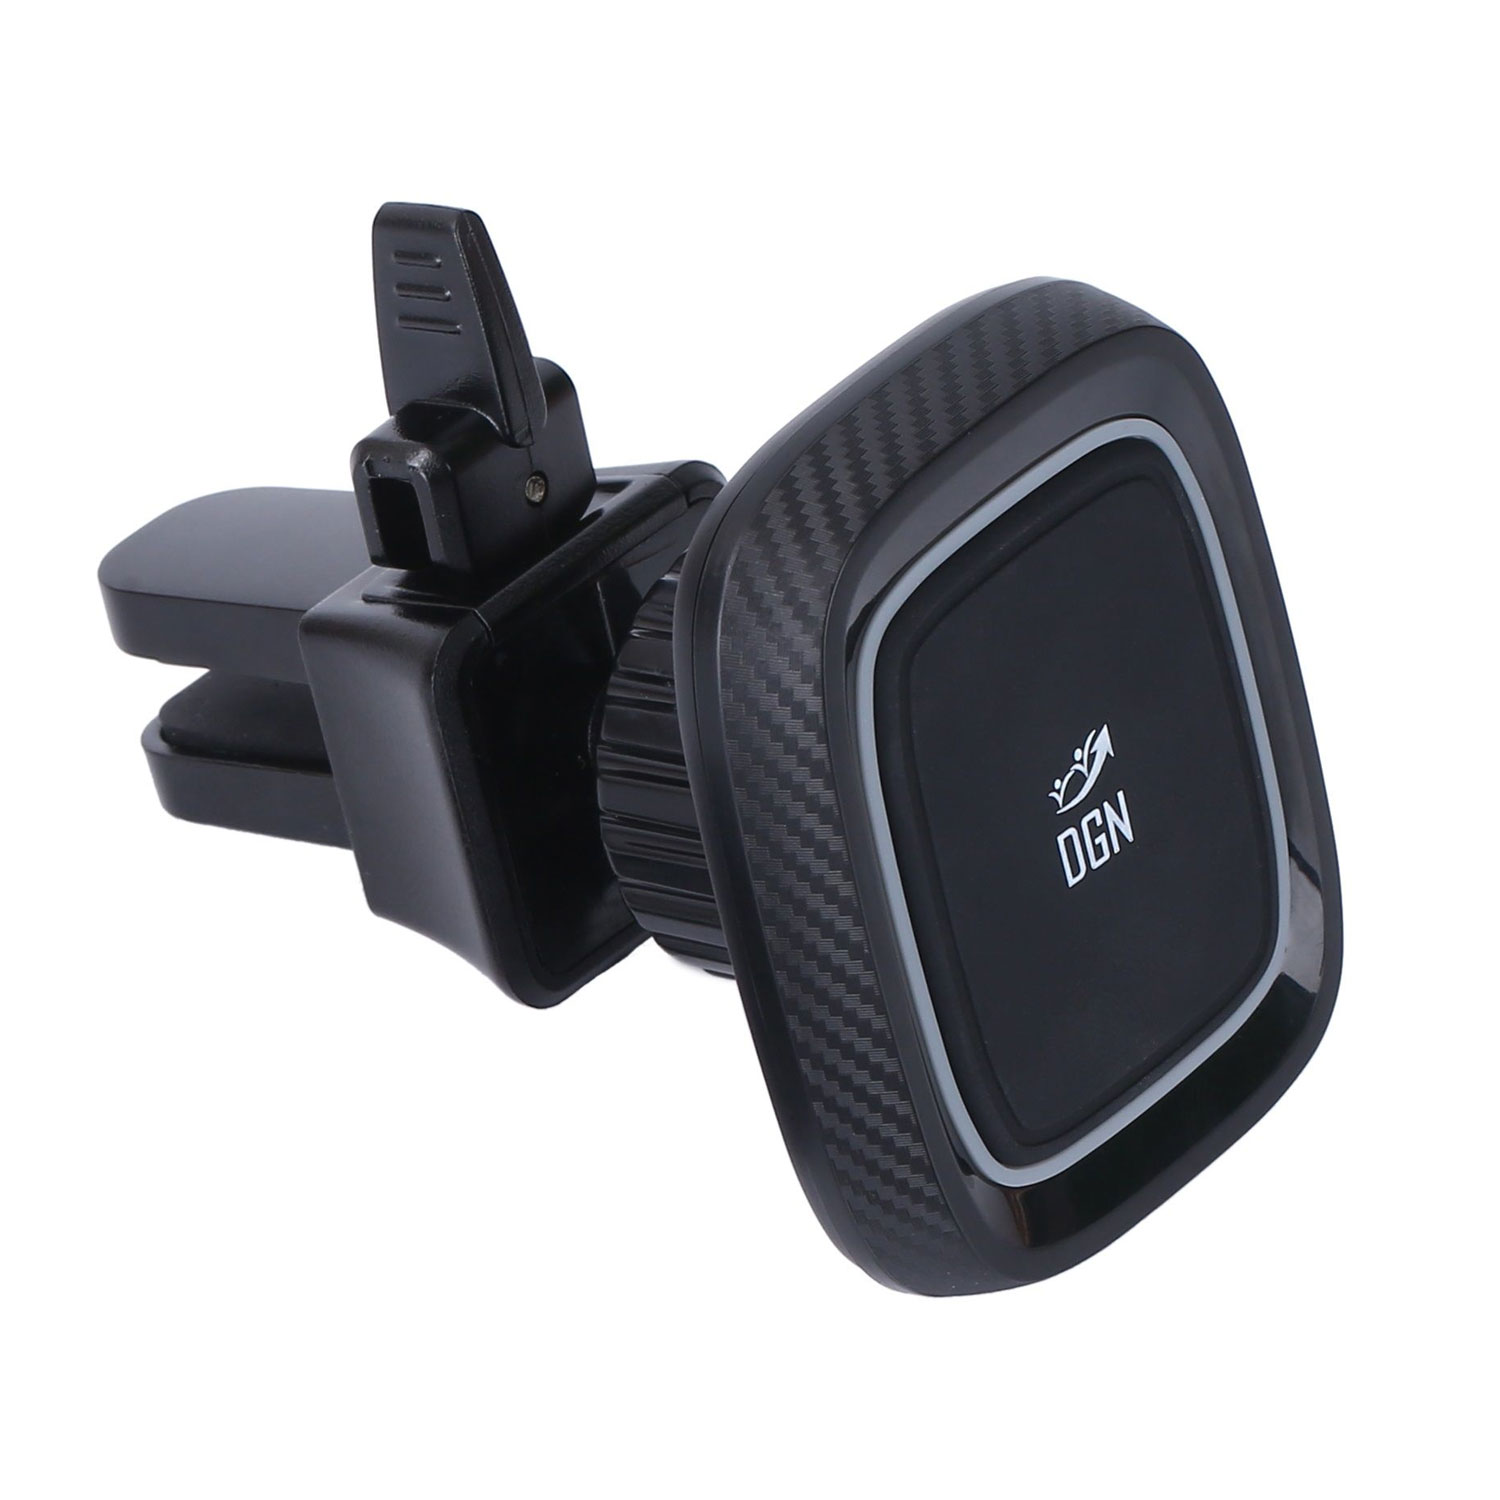 Magnetic Car Air Vent Mount For Smartphones-2 Pack